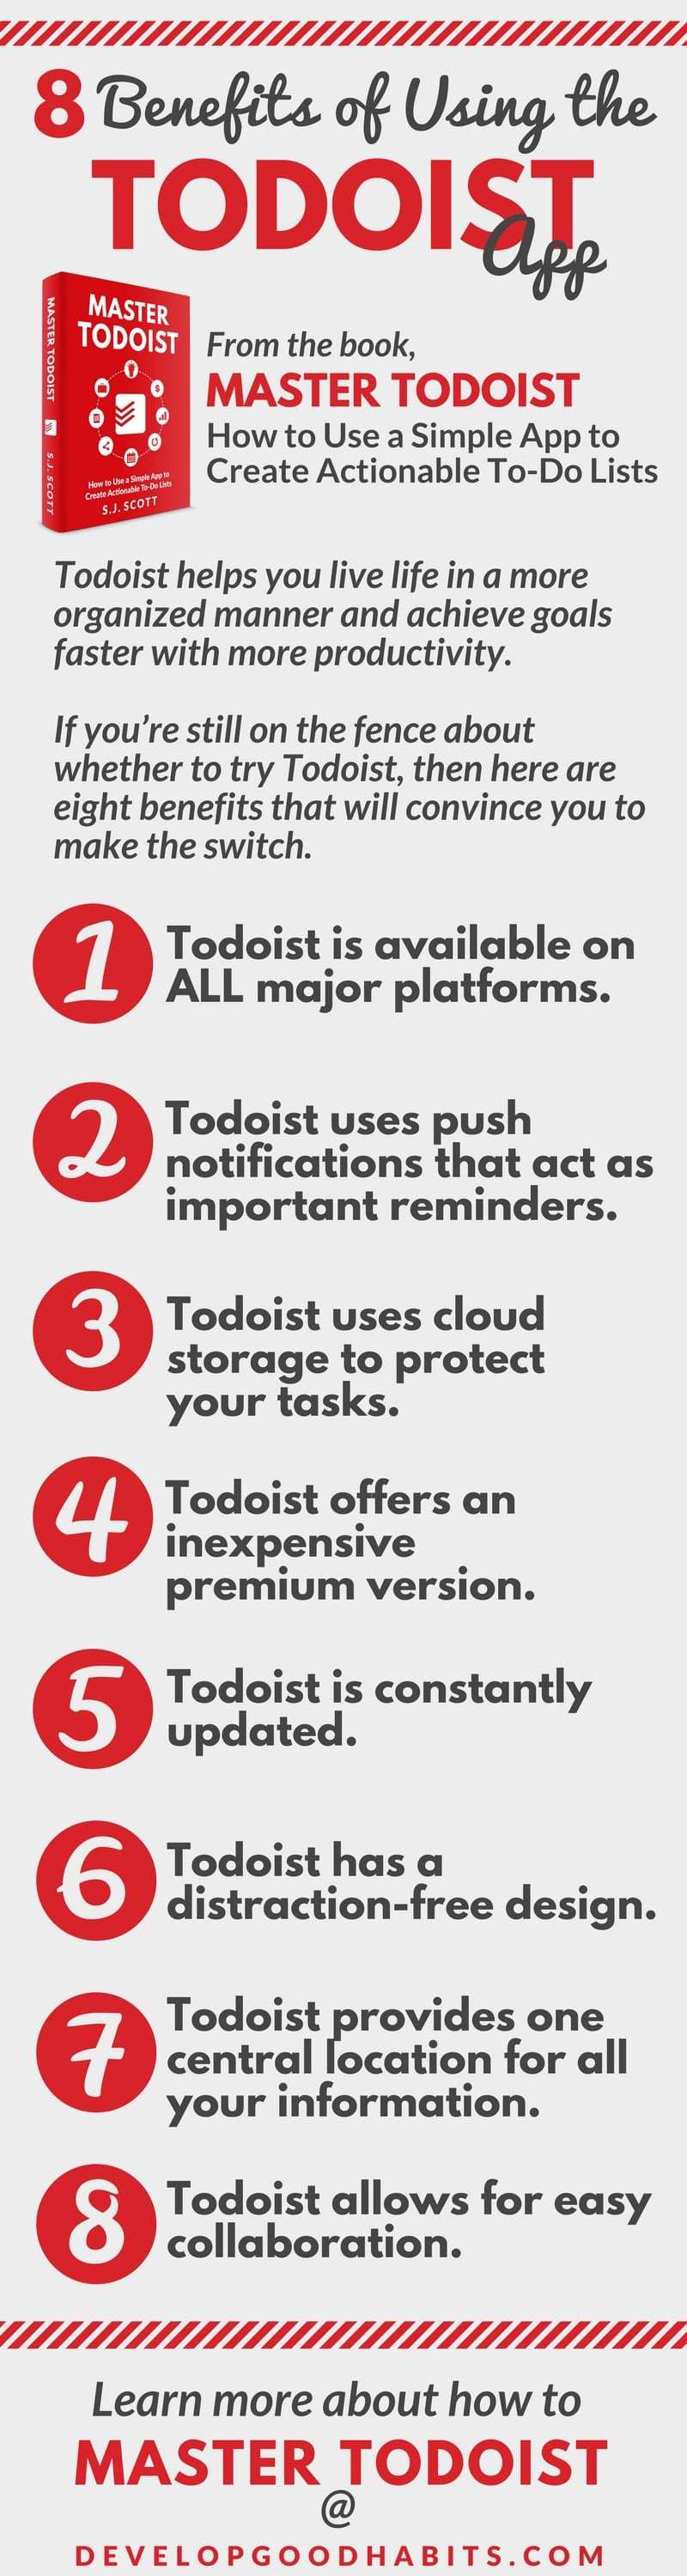 Take a look at this todoist tutorial 2018 to learn how to use Todoist to boost #productivity. #infographic #personaldevelopment #business #productivitytips #success #fitness #gtd #business #career